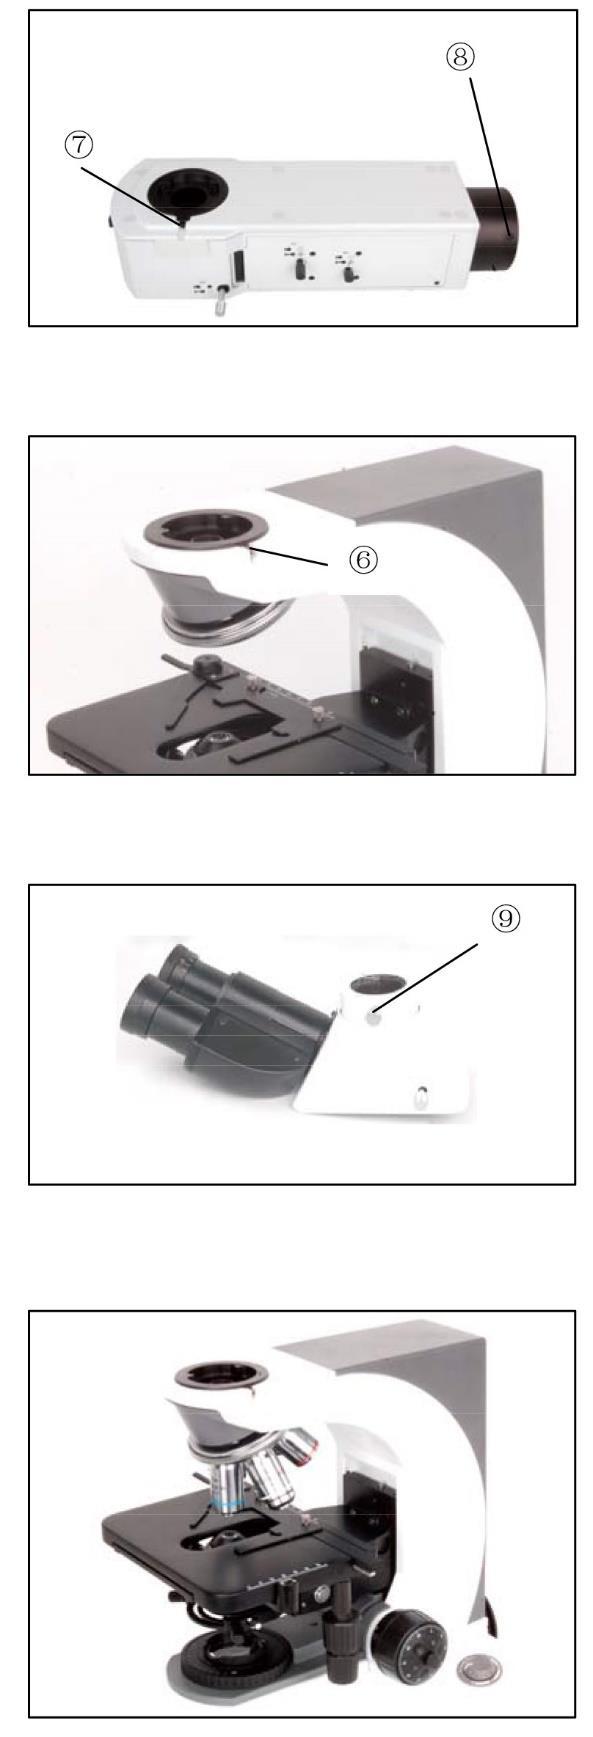 6 Fig. 4 Fig. 5 Fig. 6 2.2.2. Installing the reflected light brightfield/darkfield illuminator 1. Installing the reflected light illuminator (Fig. 4) on the head of microscope body (Fig.